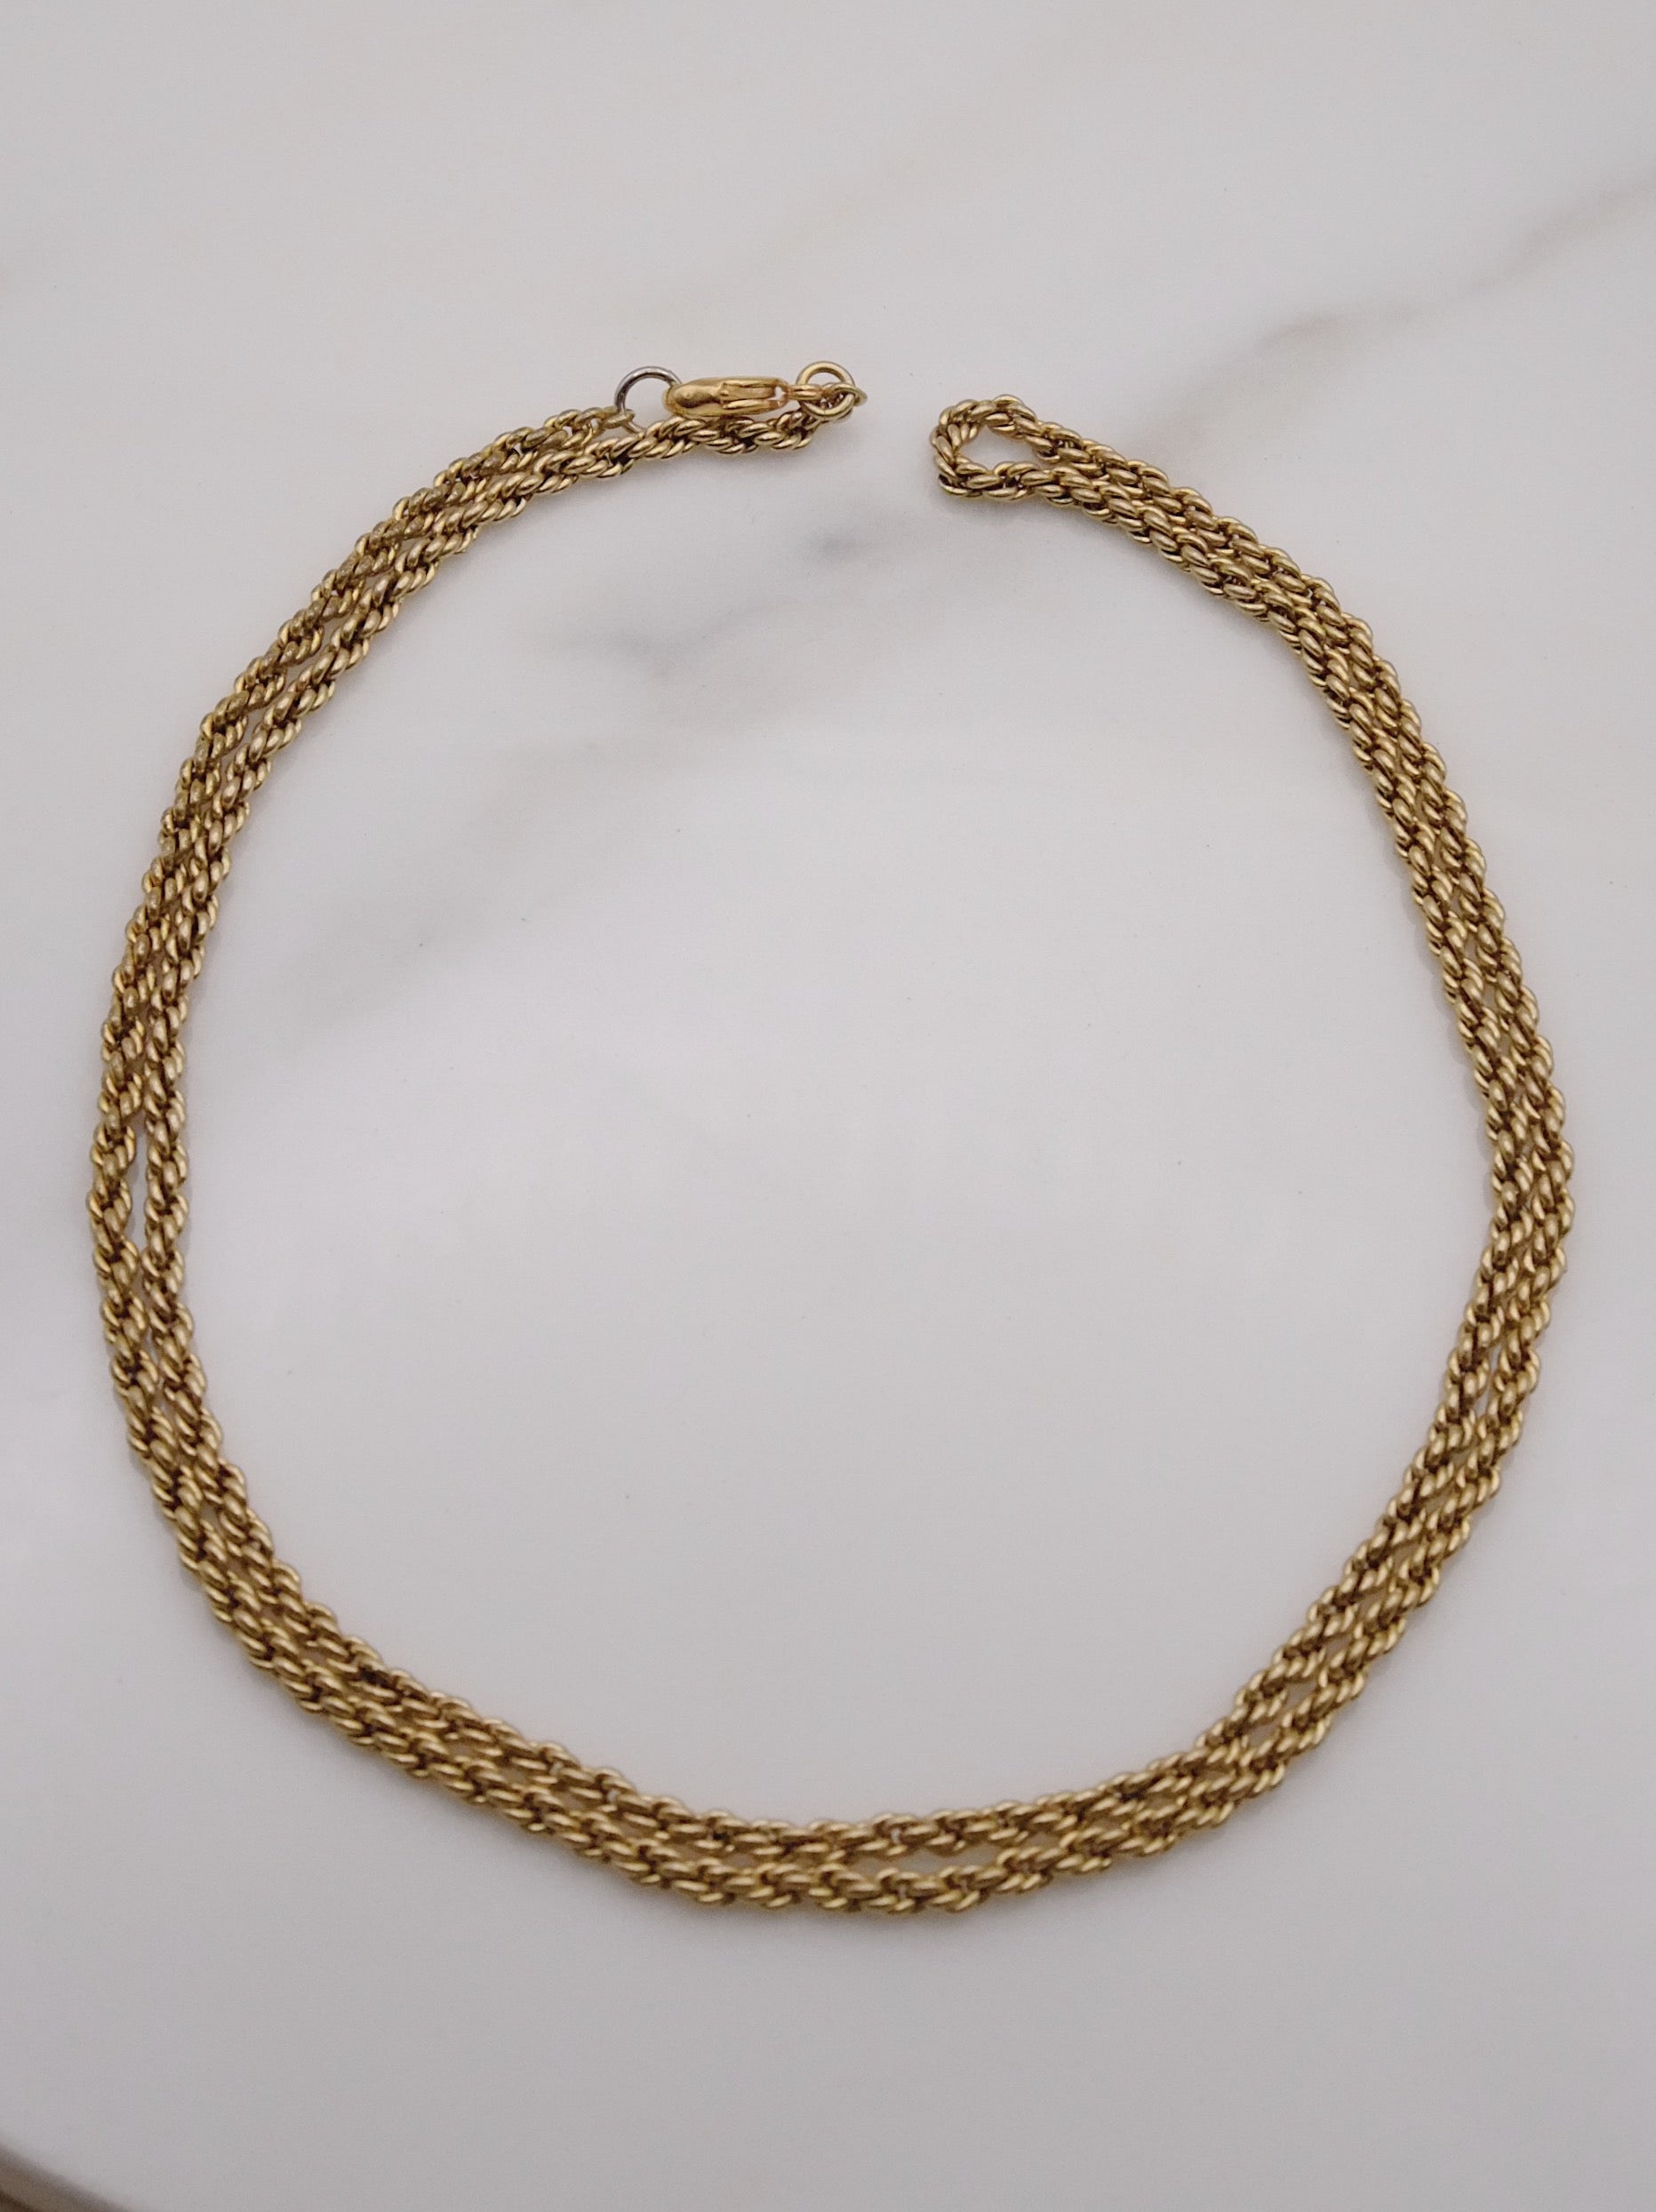 Authentic Christian Dior necklace with Dior pendant  Connect Japan Luxury